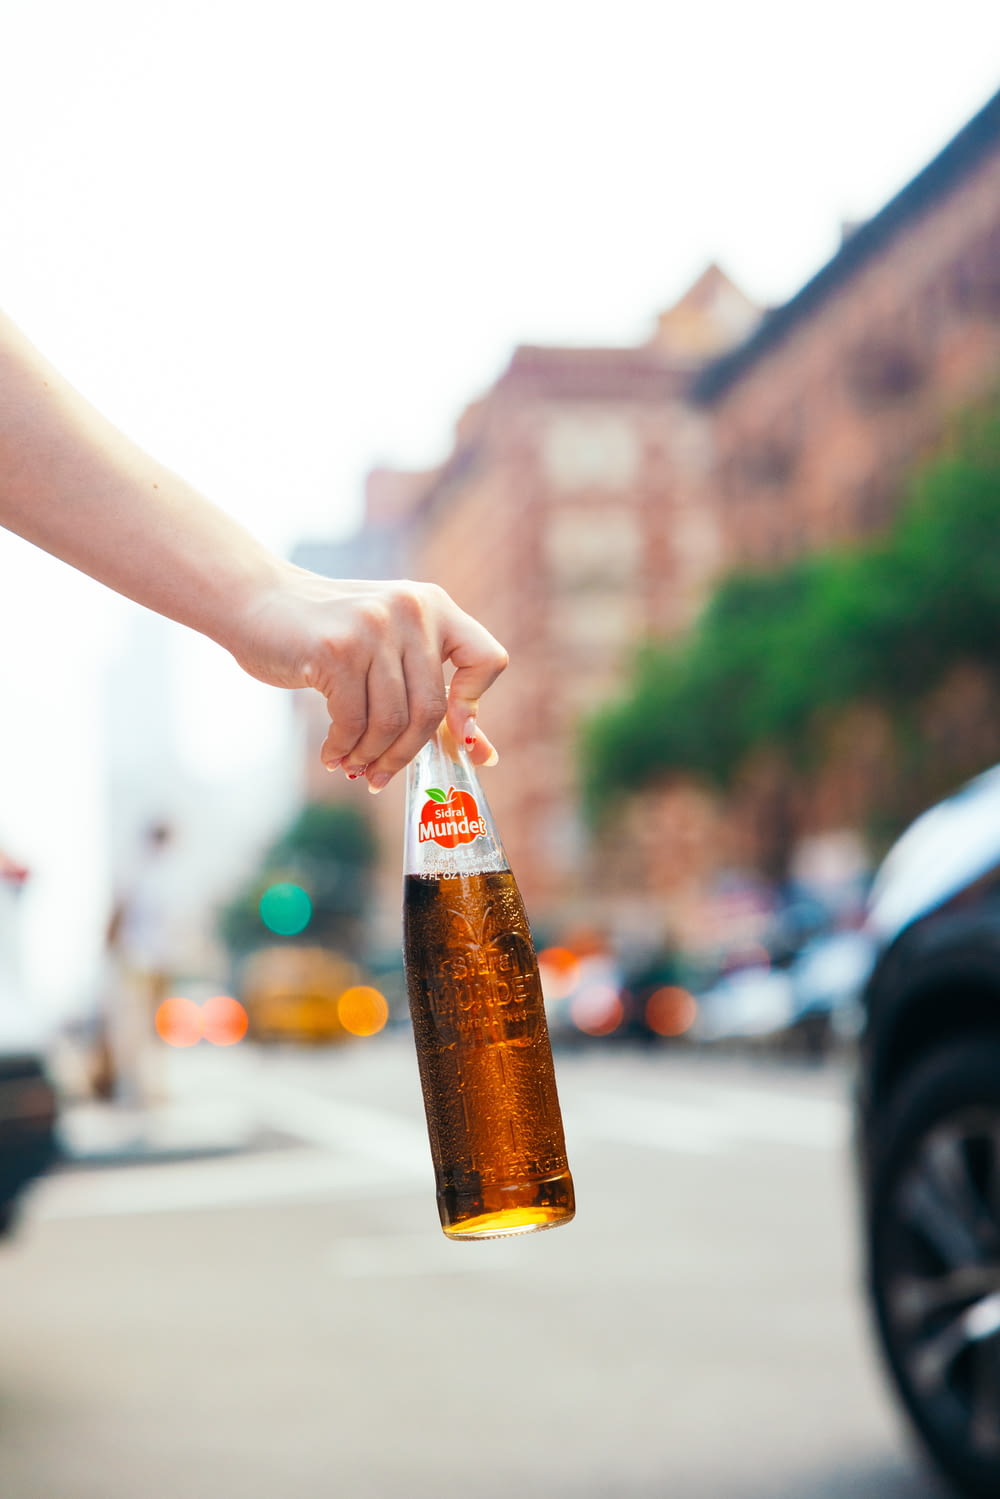 a person holding a bottle of beer on a city street